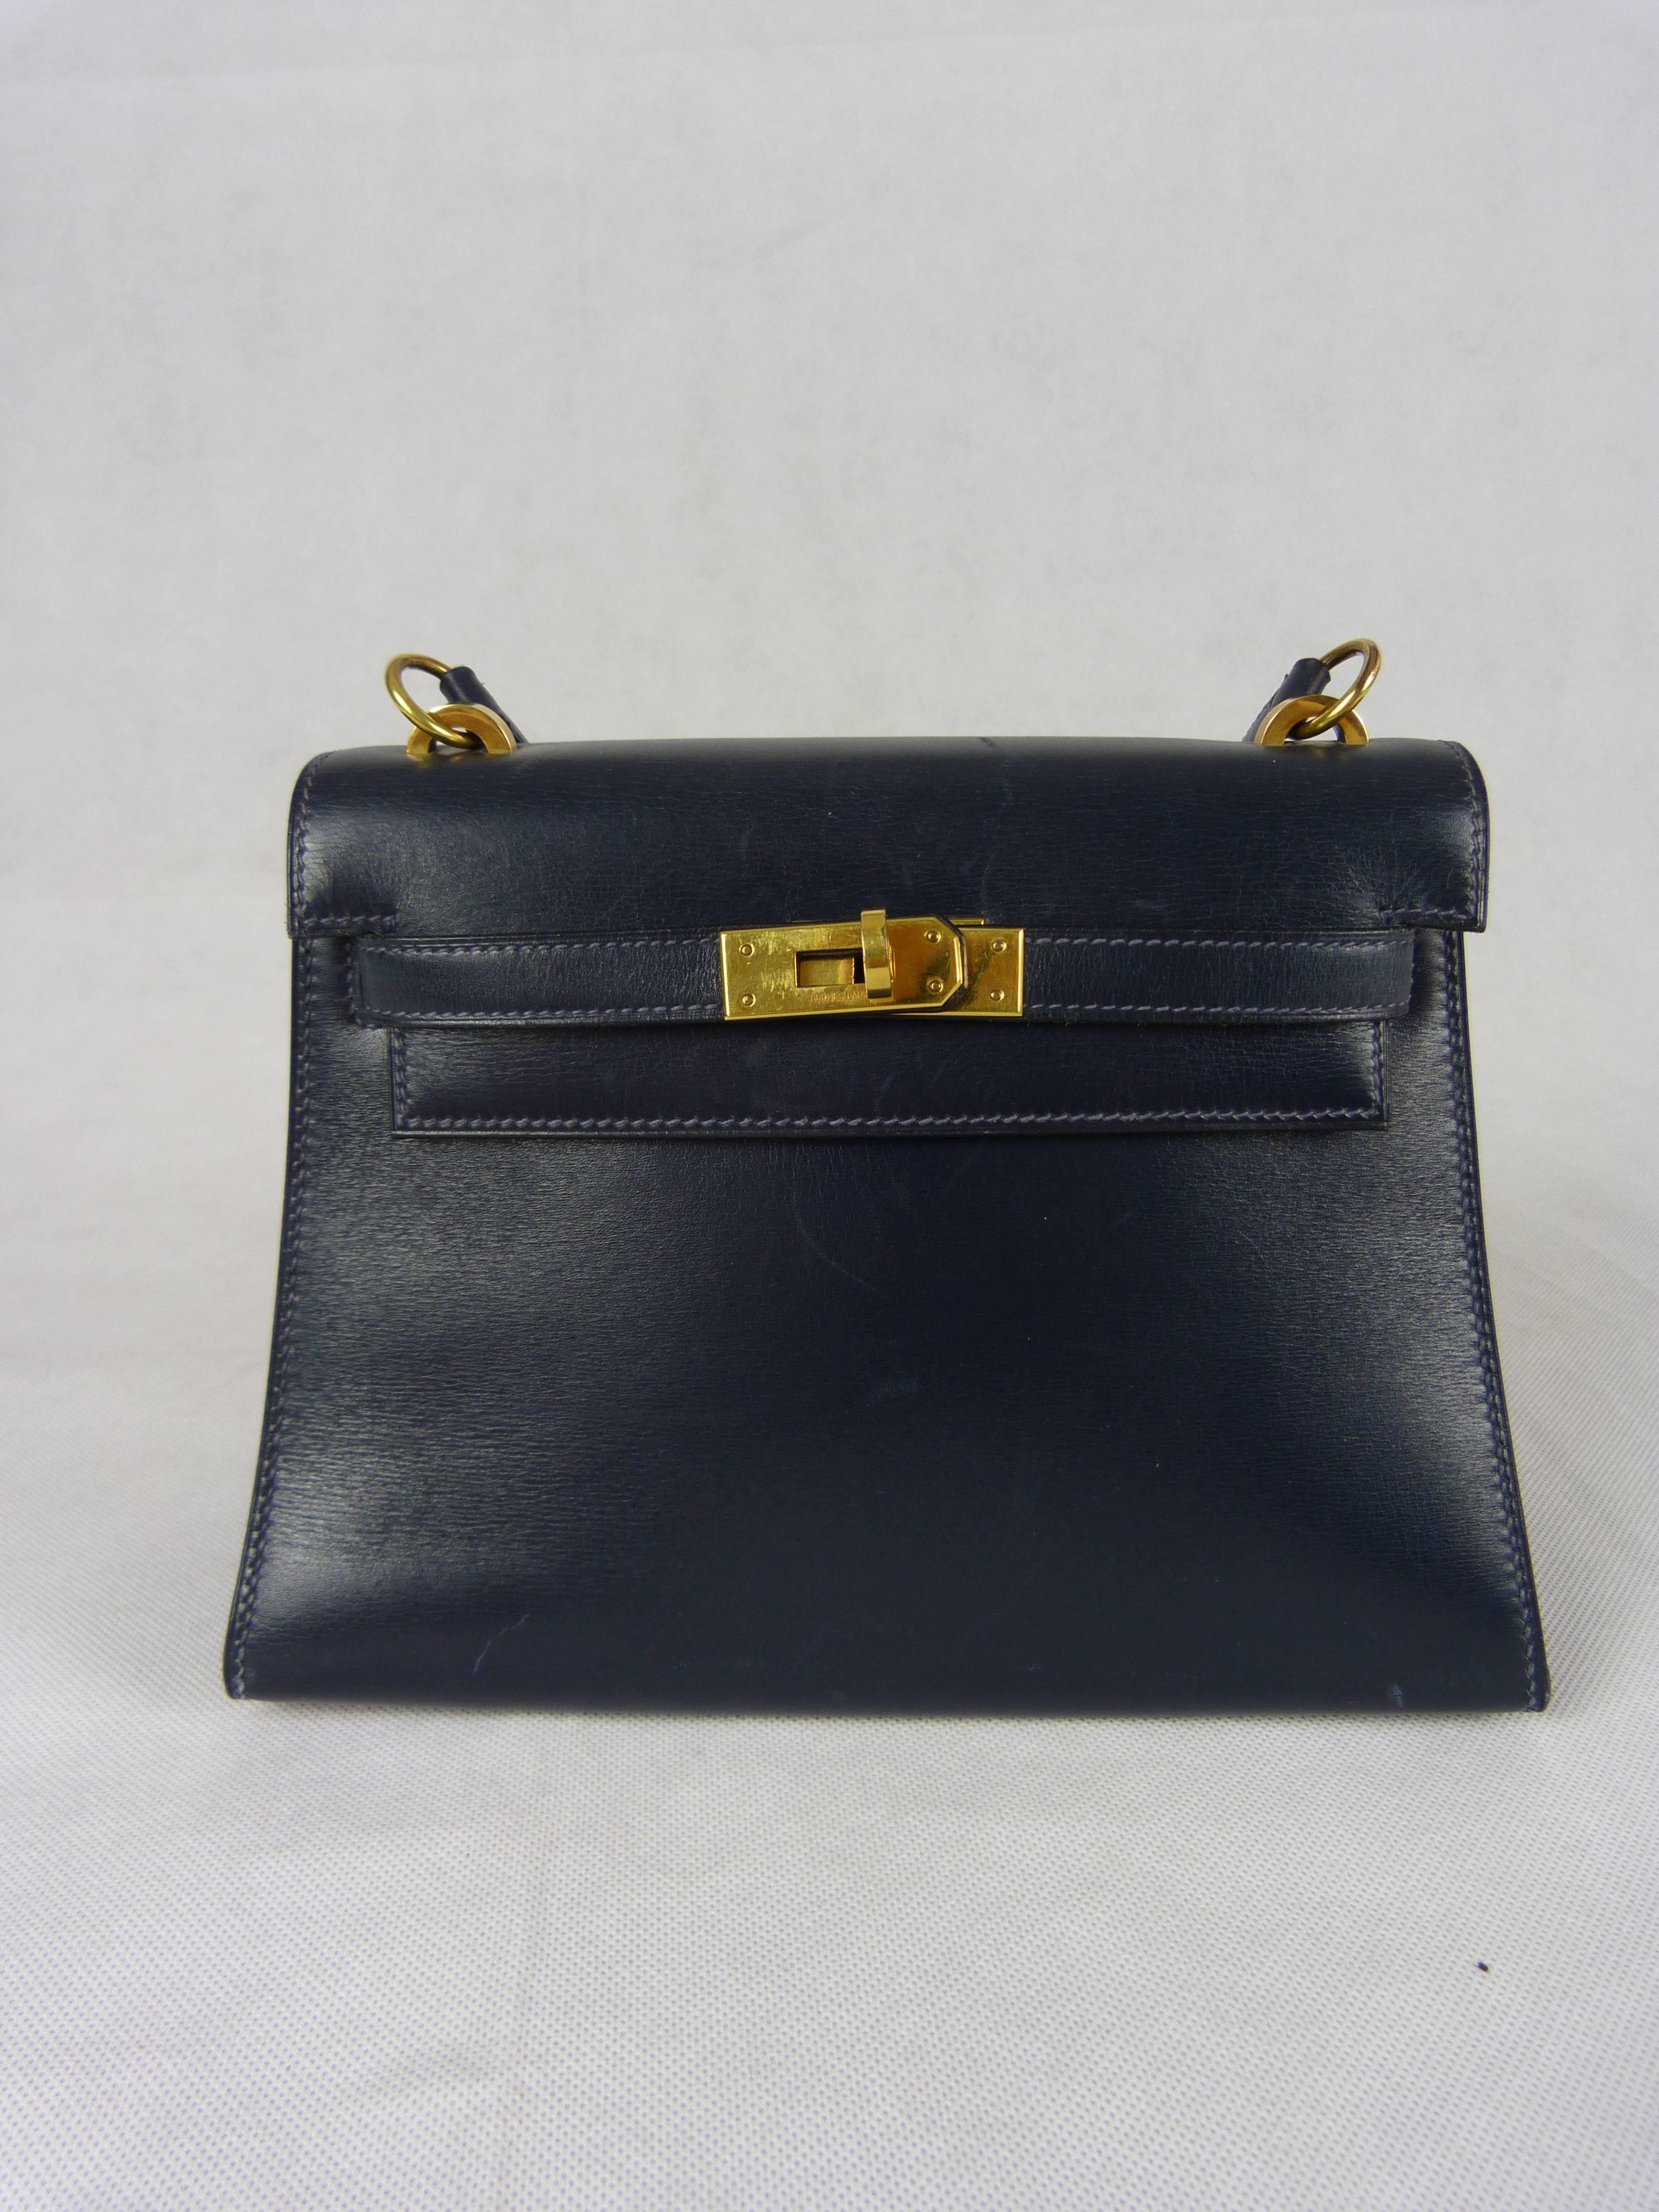 Hermès Blue Nuit mini Kelly 20Cm Hermès. (Sellier model)

Box leather and Gold trimmings.

Good condition.

Minor scratches and some are more important in the underside than others (see picture)

Stain of discoloration on the strap (see